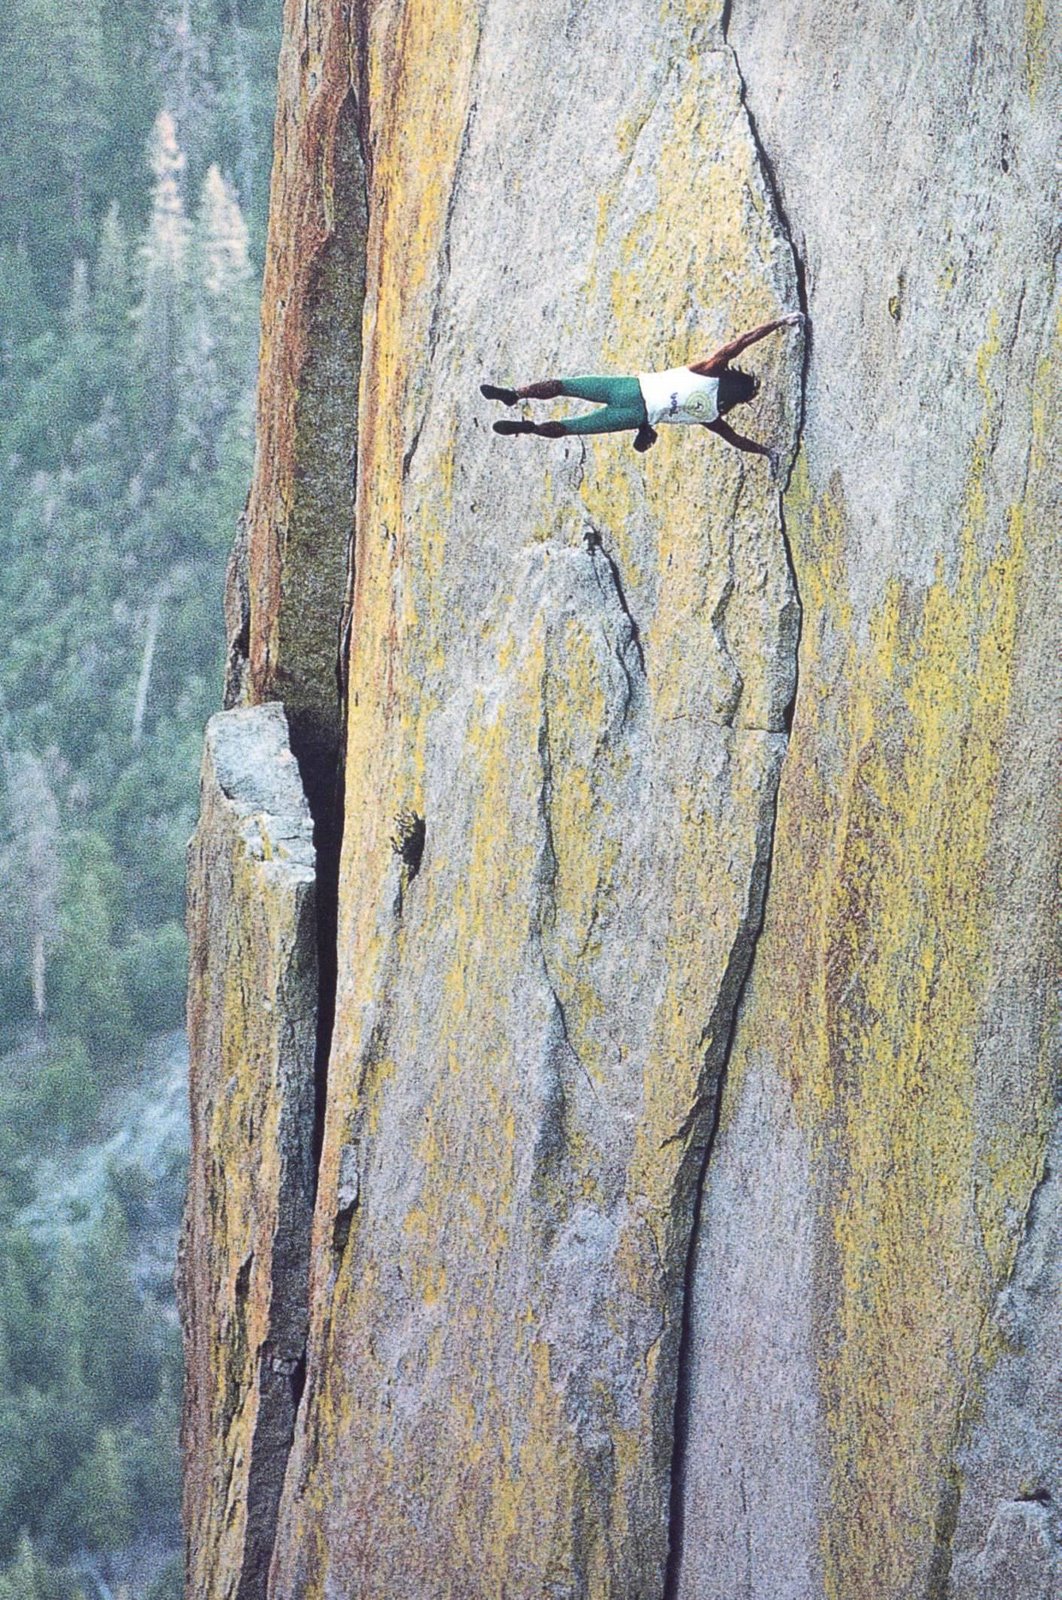 Free Solo Climber Dan Osman-Dan Osman died November 23, 1998 at the age of 35 after his rope failed while performing a “controlled free-fall” jump from the Leaning Tower rock formation inYosemite National Park